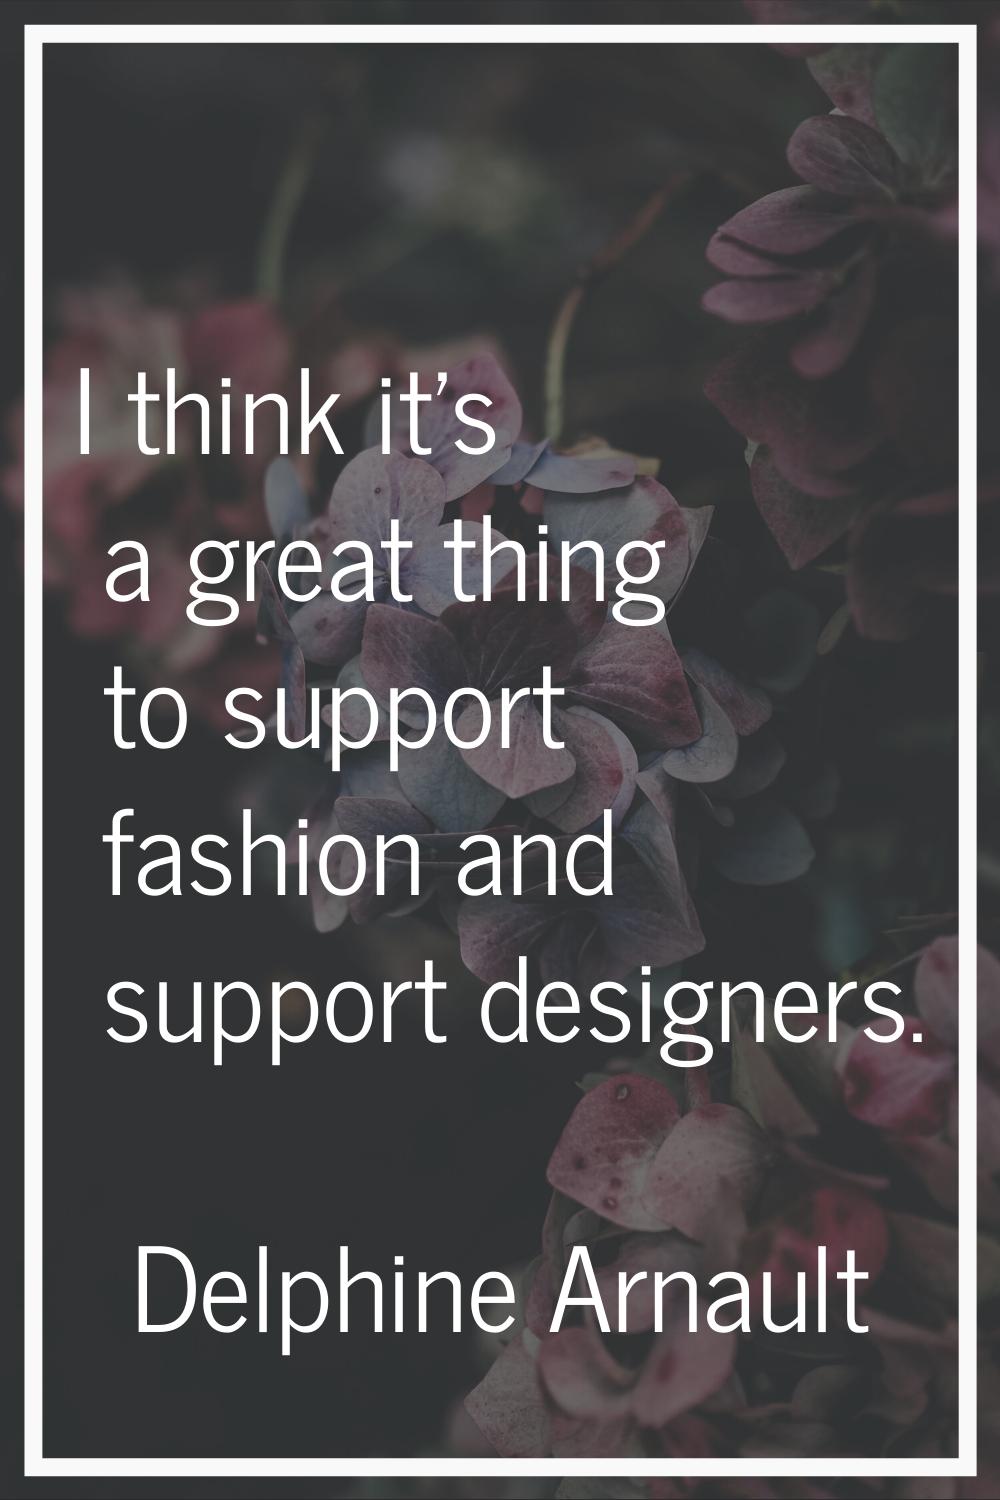 I think it's a great thing to support fashion and support designers.